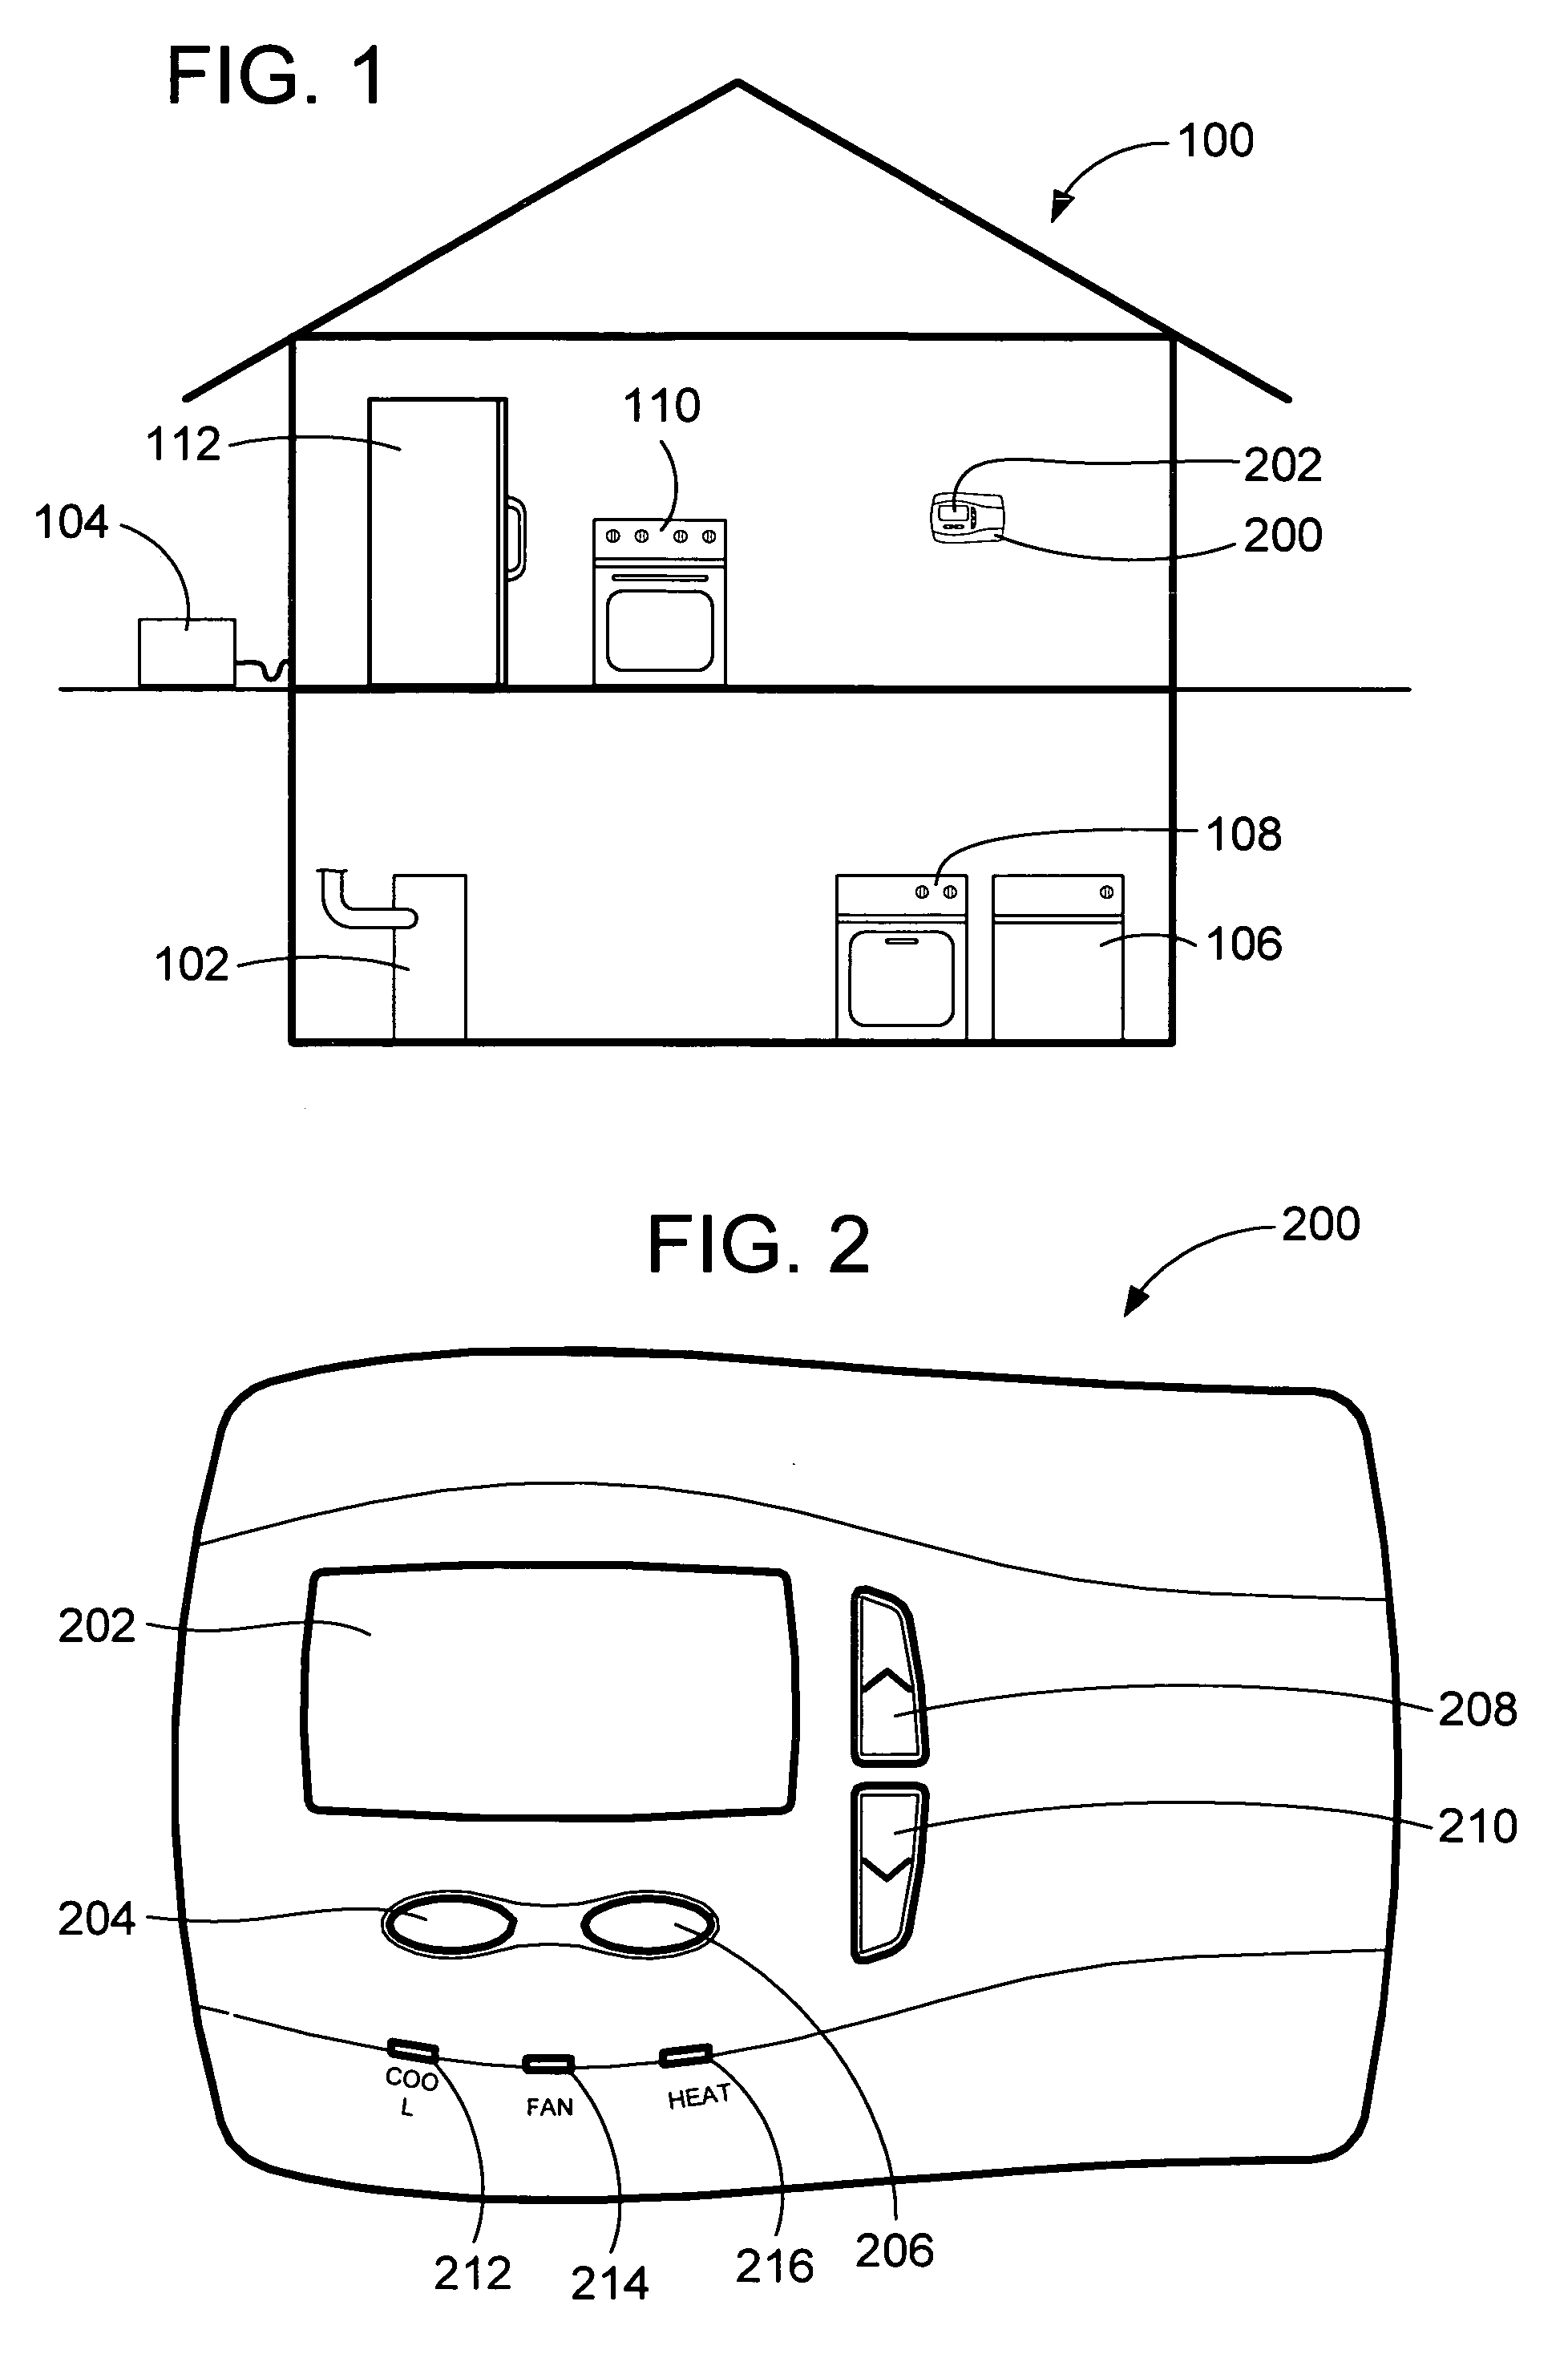 Appliance diagnostic display apparatus and network incorporating same